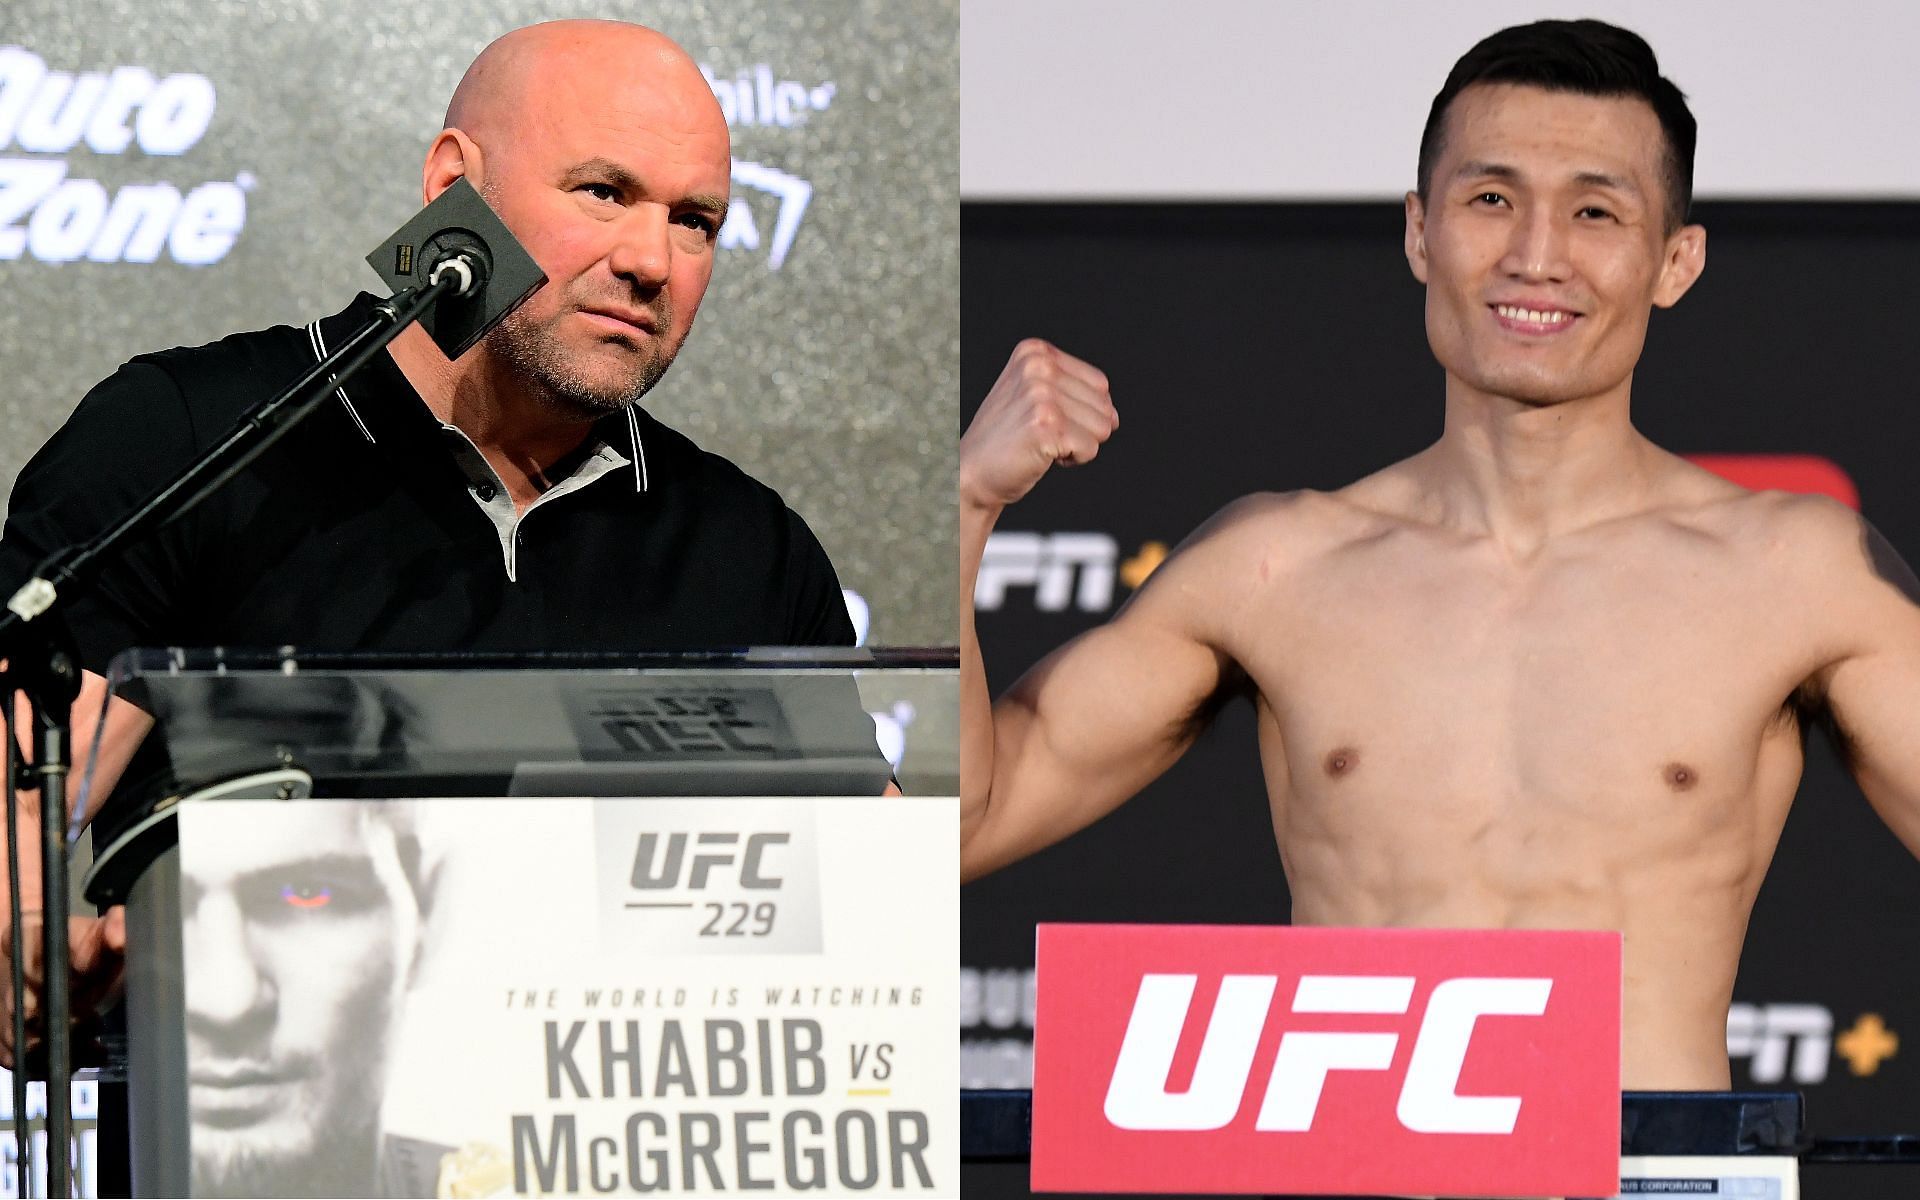 Dana White (left) and Chan Sung Jung (right) (Images via Getty)